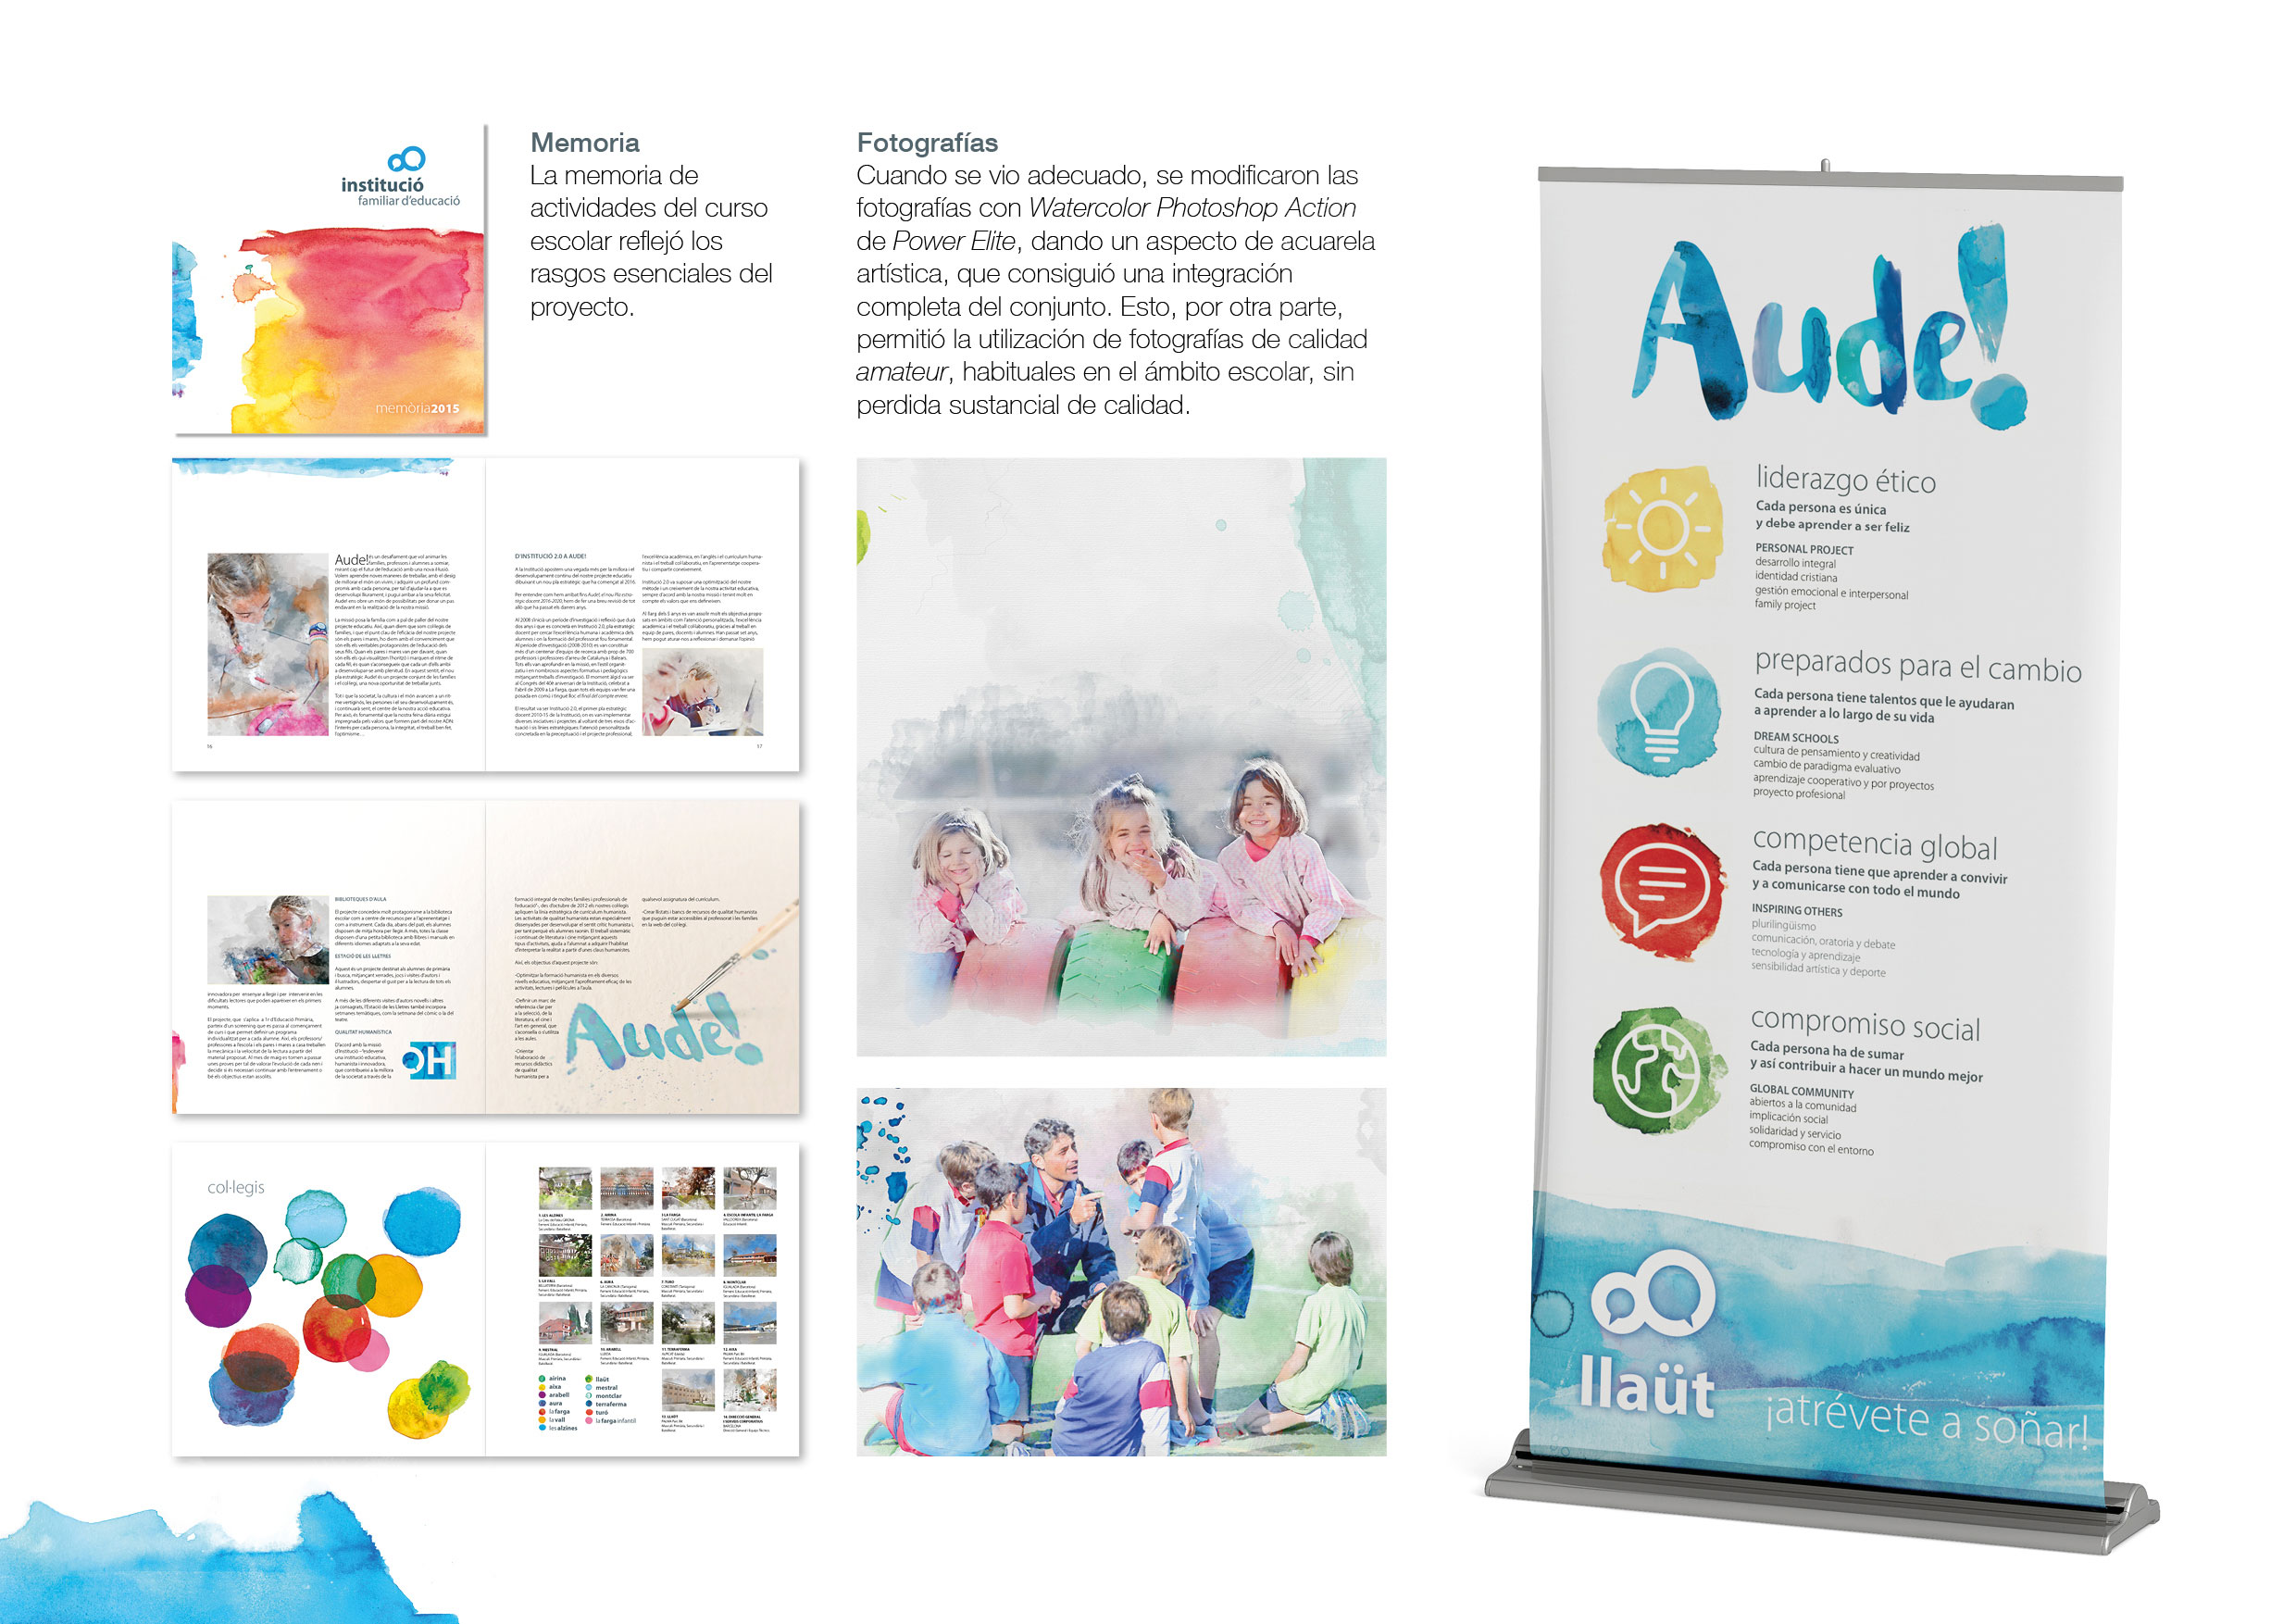 Aude! by Miquel Rossy - Creative Work - $i